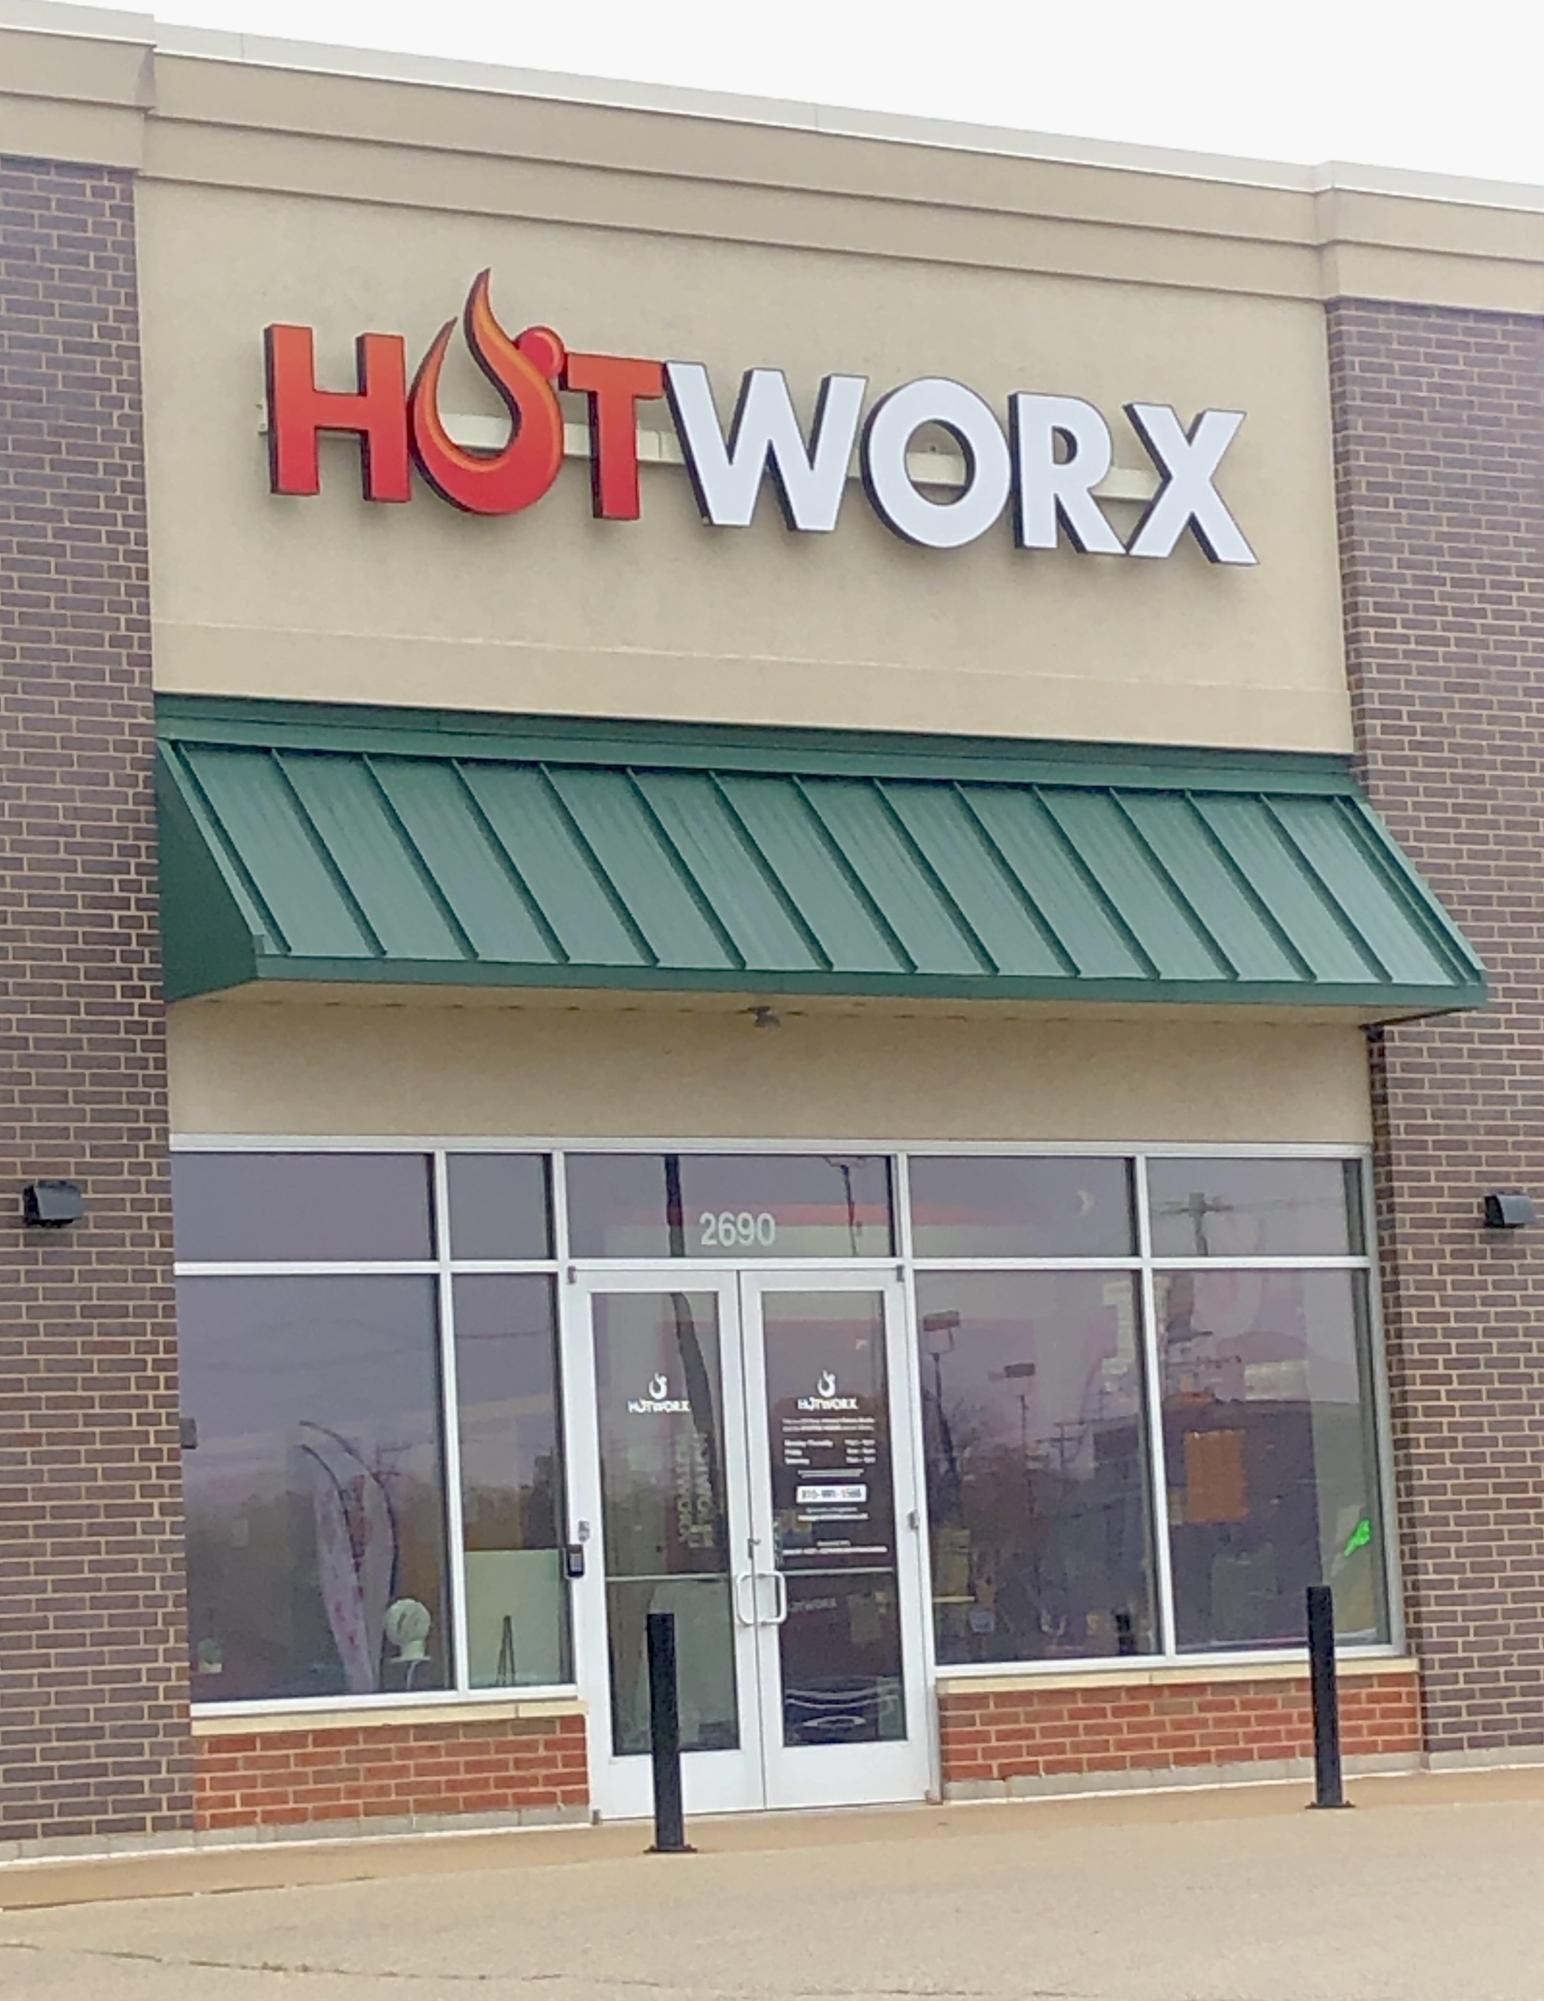 Do you have everything you need for the best HOTWORX Media